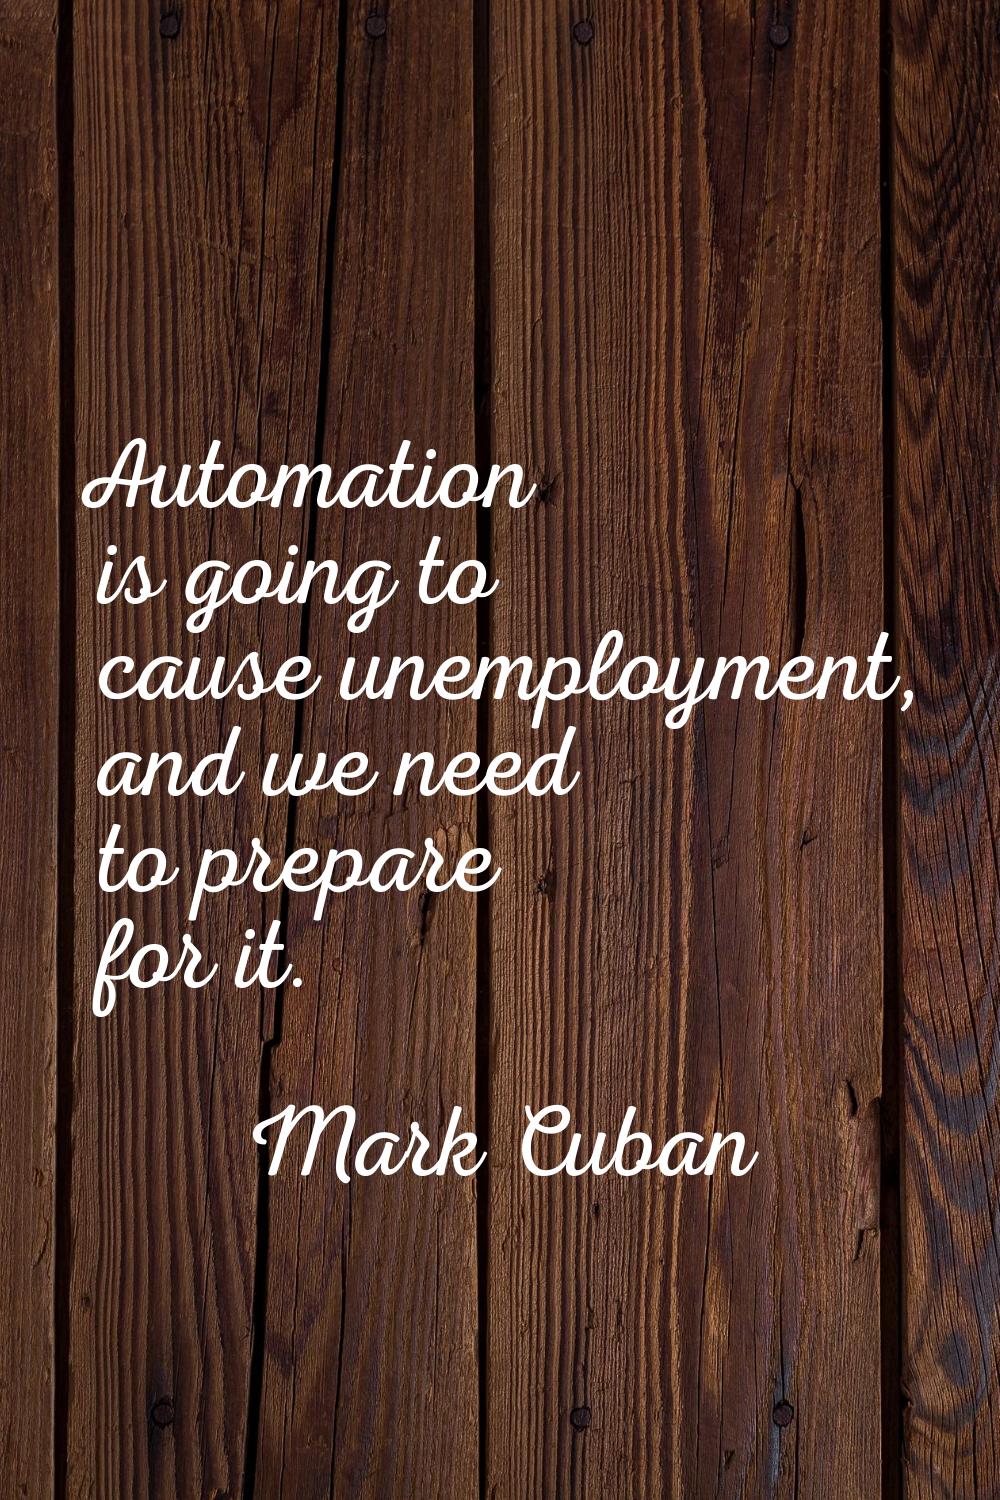 Automation is going to cause unemployment, and we need to prepare for it.